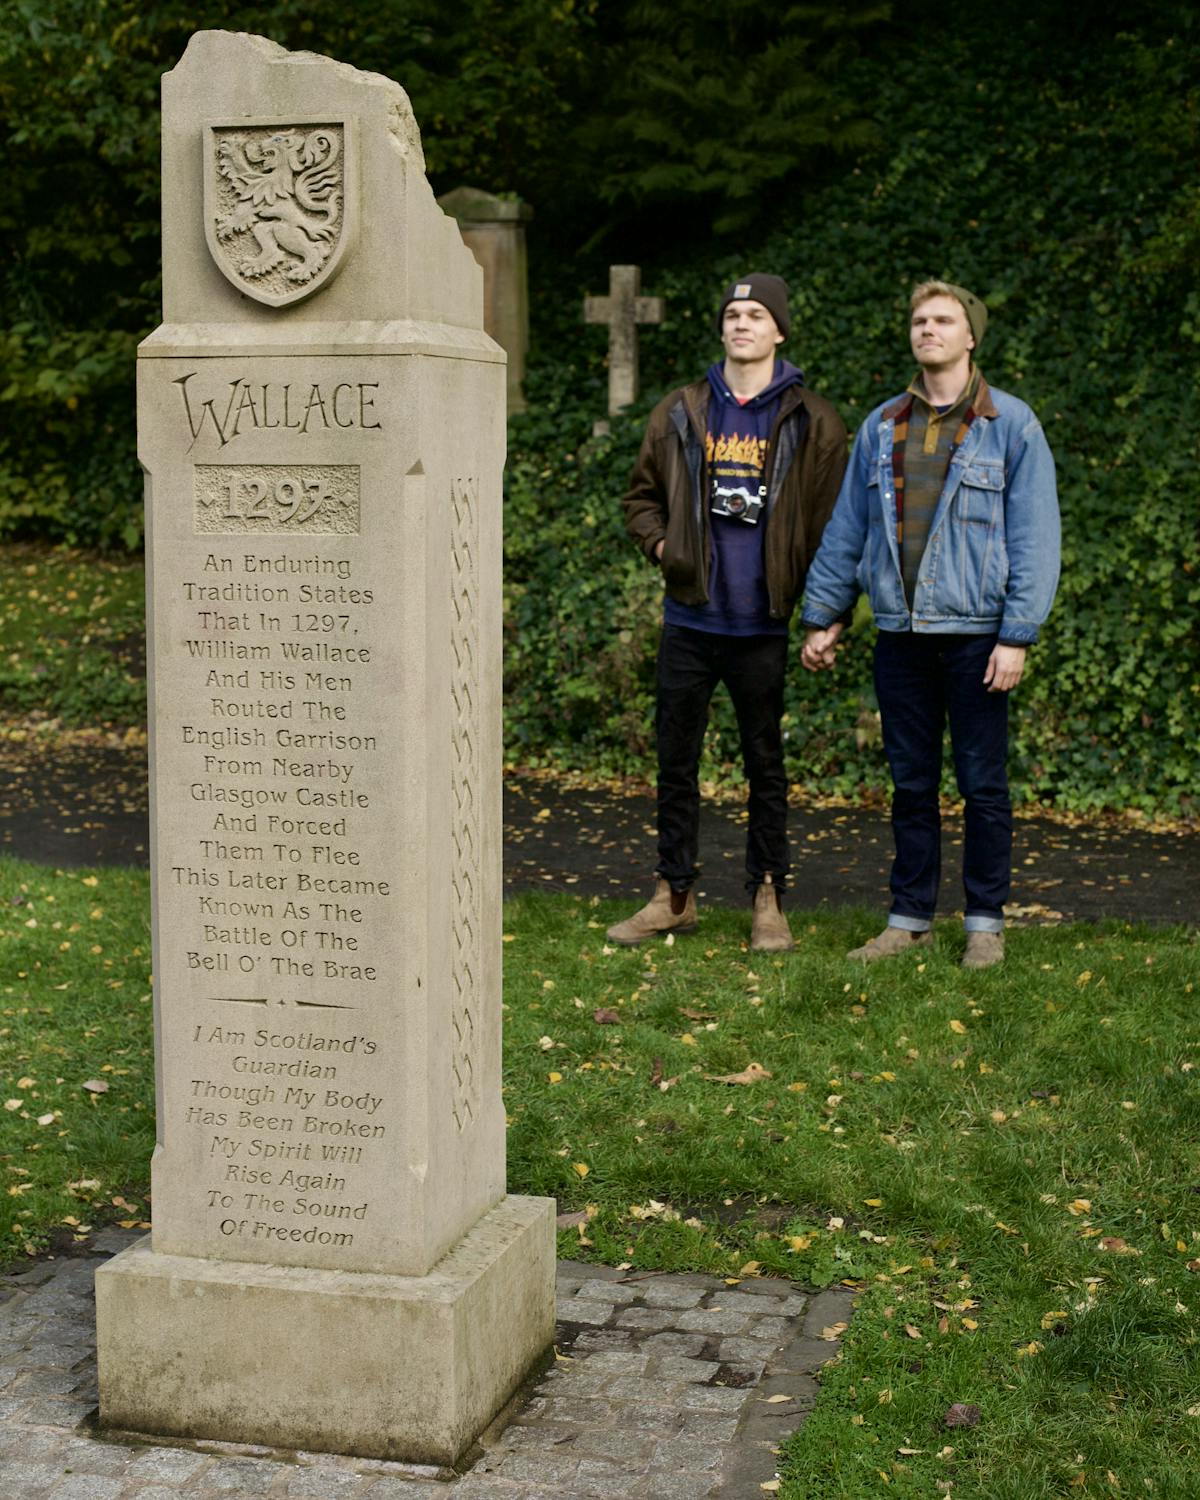 Allister and Jesse standing in front of the William Wallace memorial at the Glasgow Necropolis